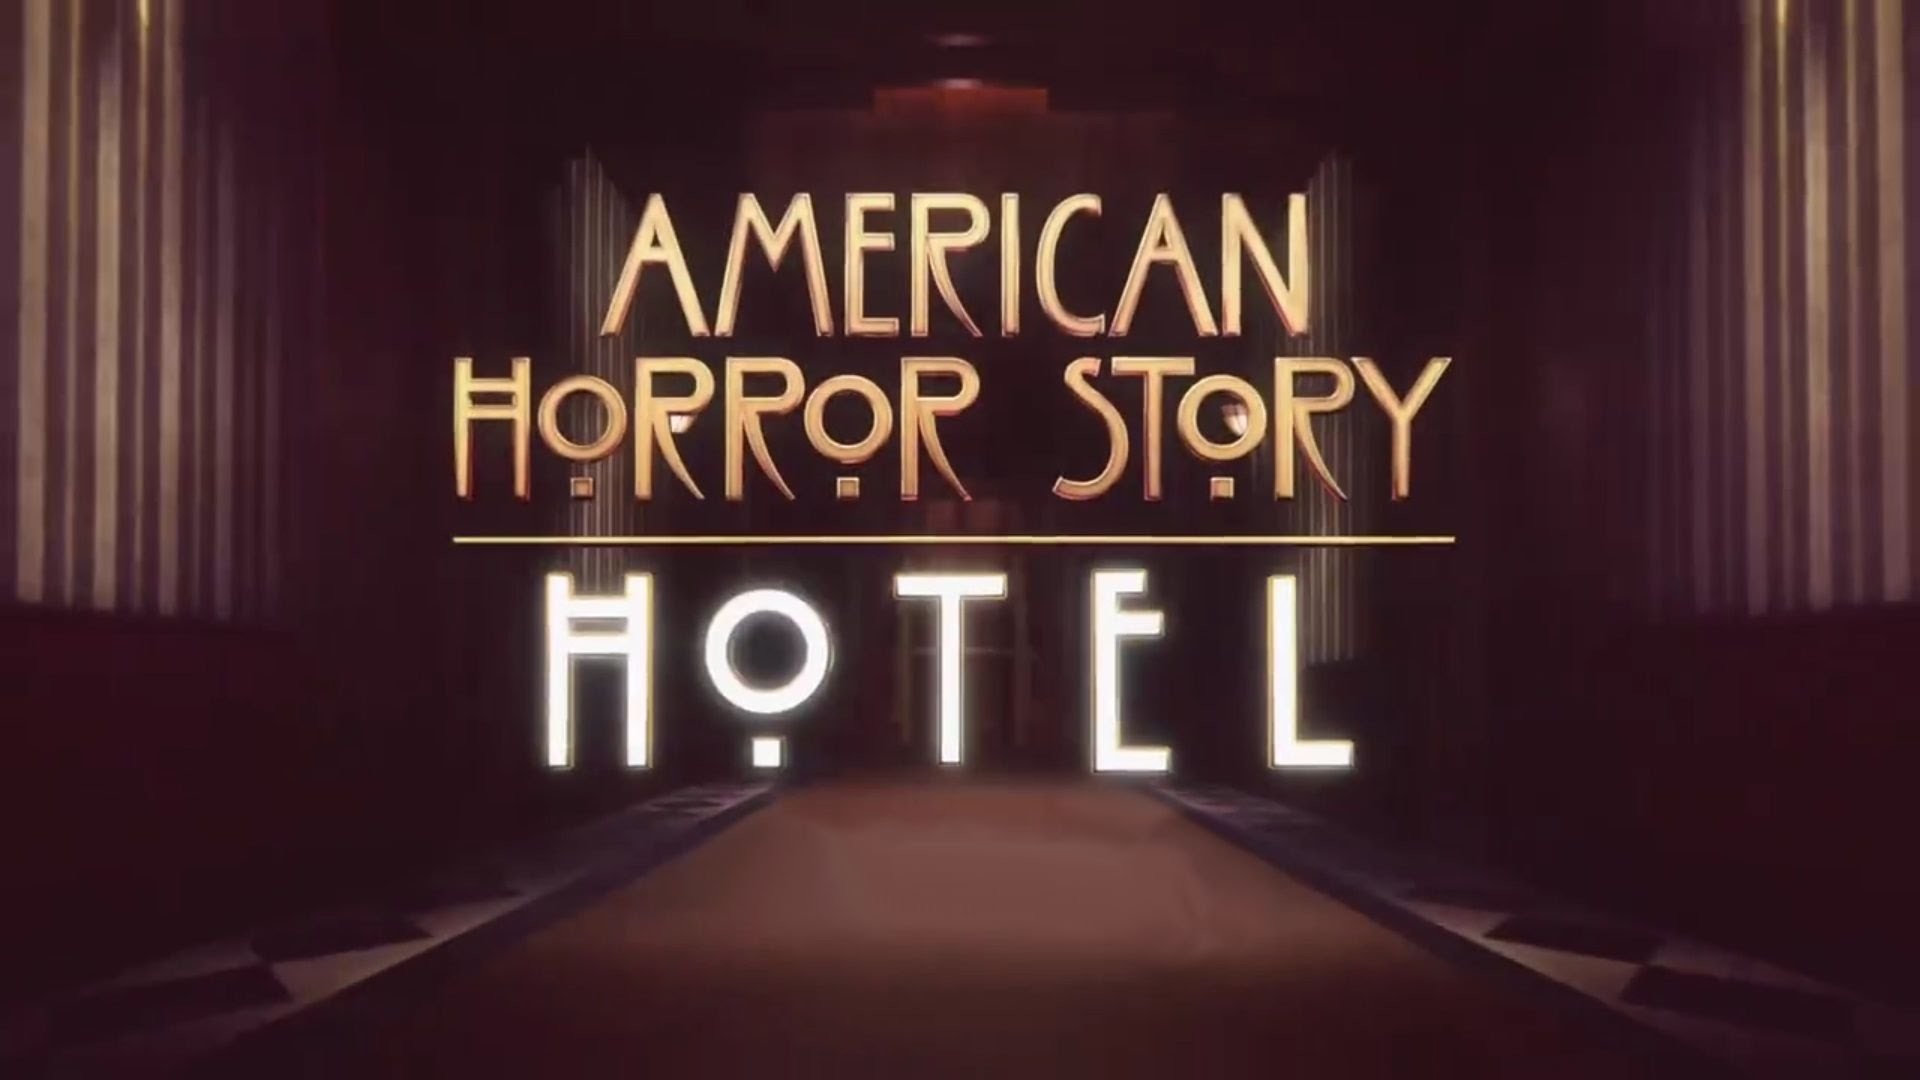 1920x1080 American Horror Story: Hotel Wallpapers High Resolution and Quality .